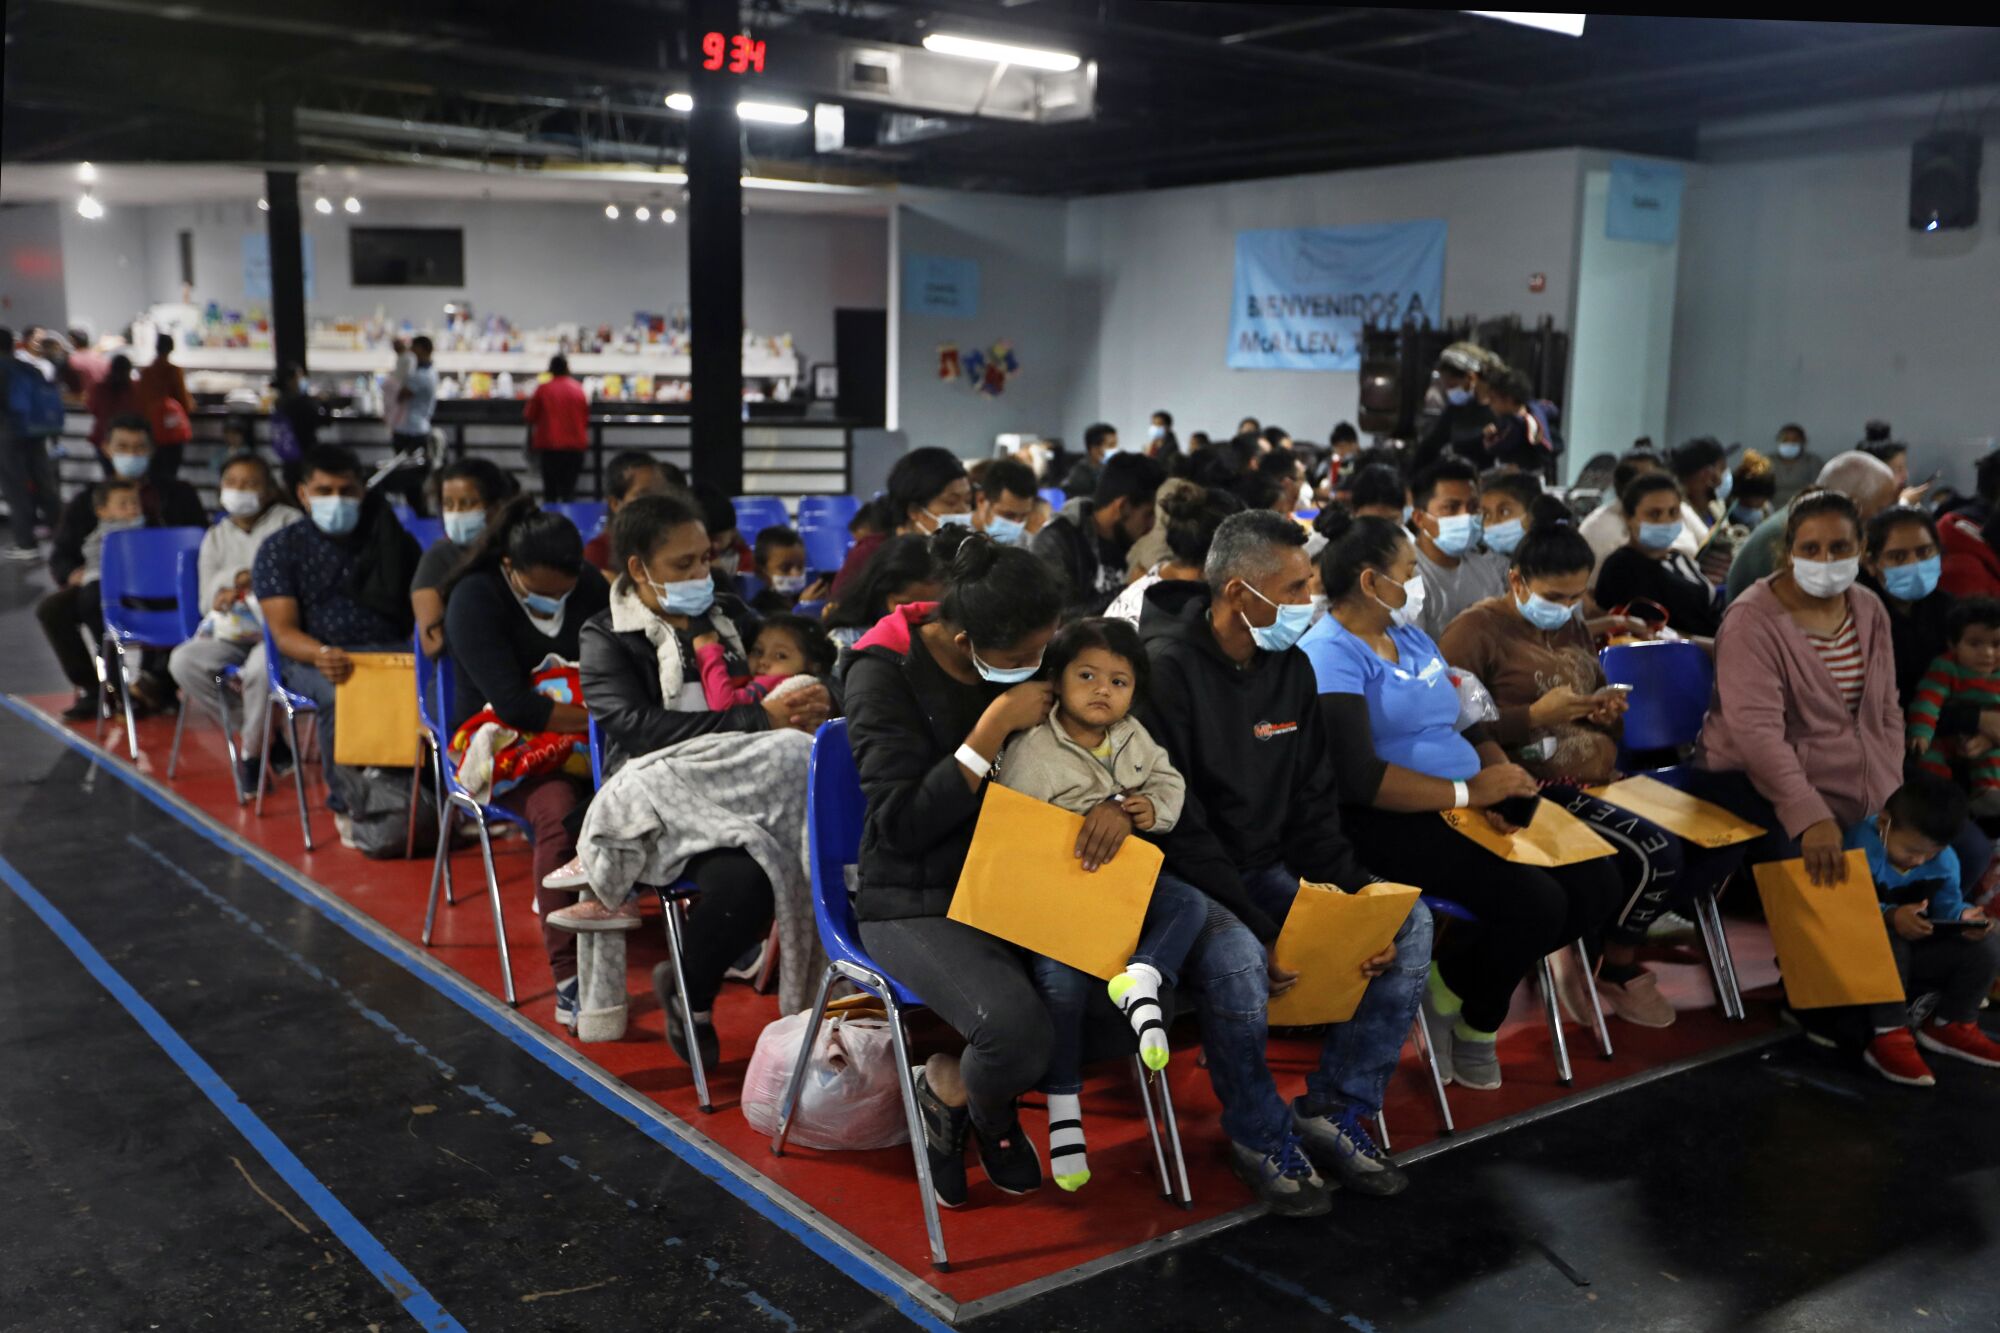 Asylum seekers holding manila envelopes sit in rows of chairs